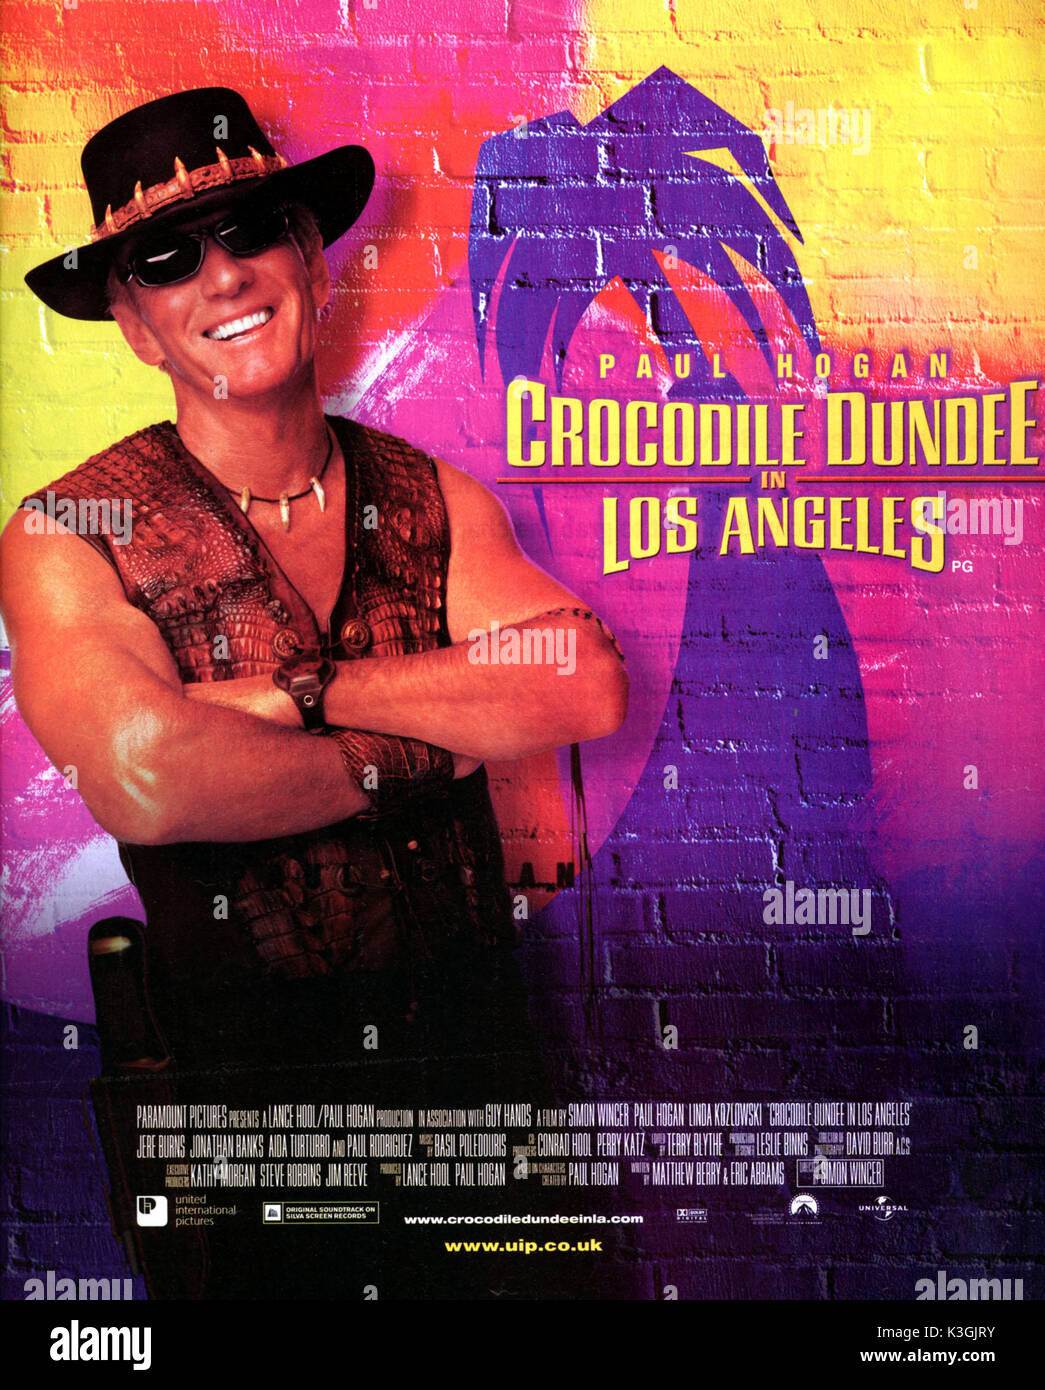 CROCODILE DUNDEE IN LOS ANGELES data: 2001 Foto Stock